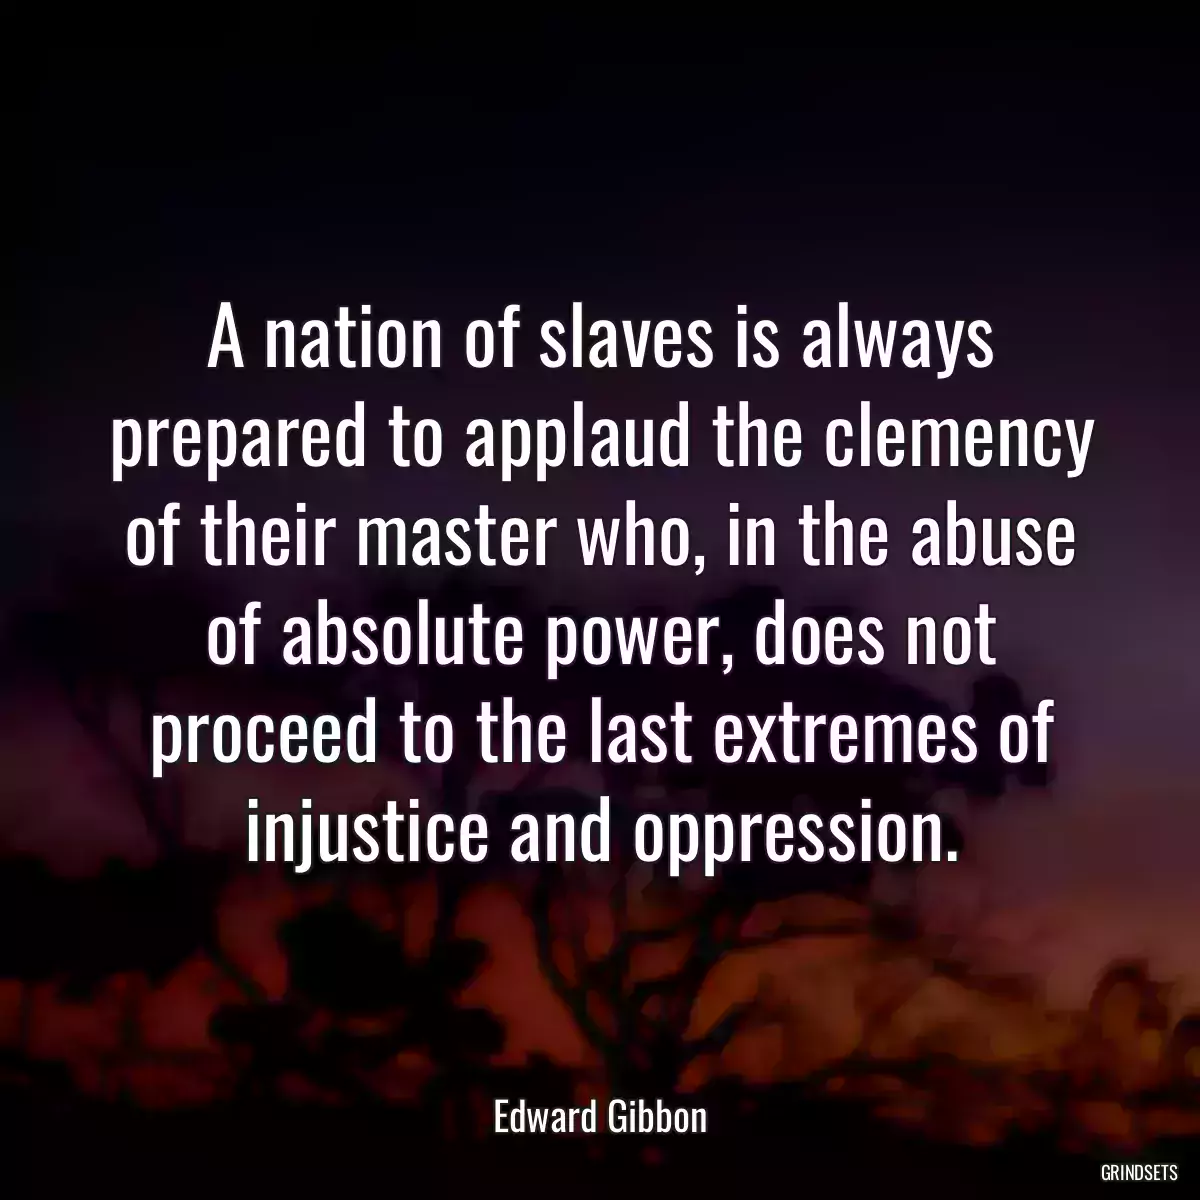 A nation of slaves is always prepared to applaud the clemency of their master who, in the abuse of absolute power, does not proceed to the last extremes of injustice and oppression.